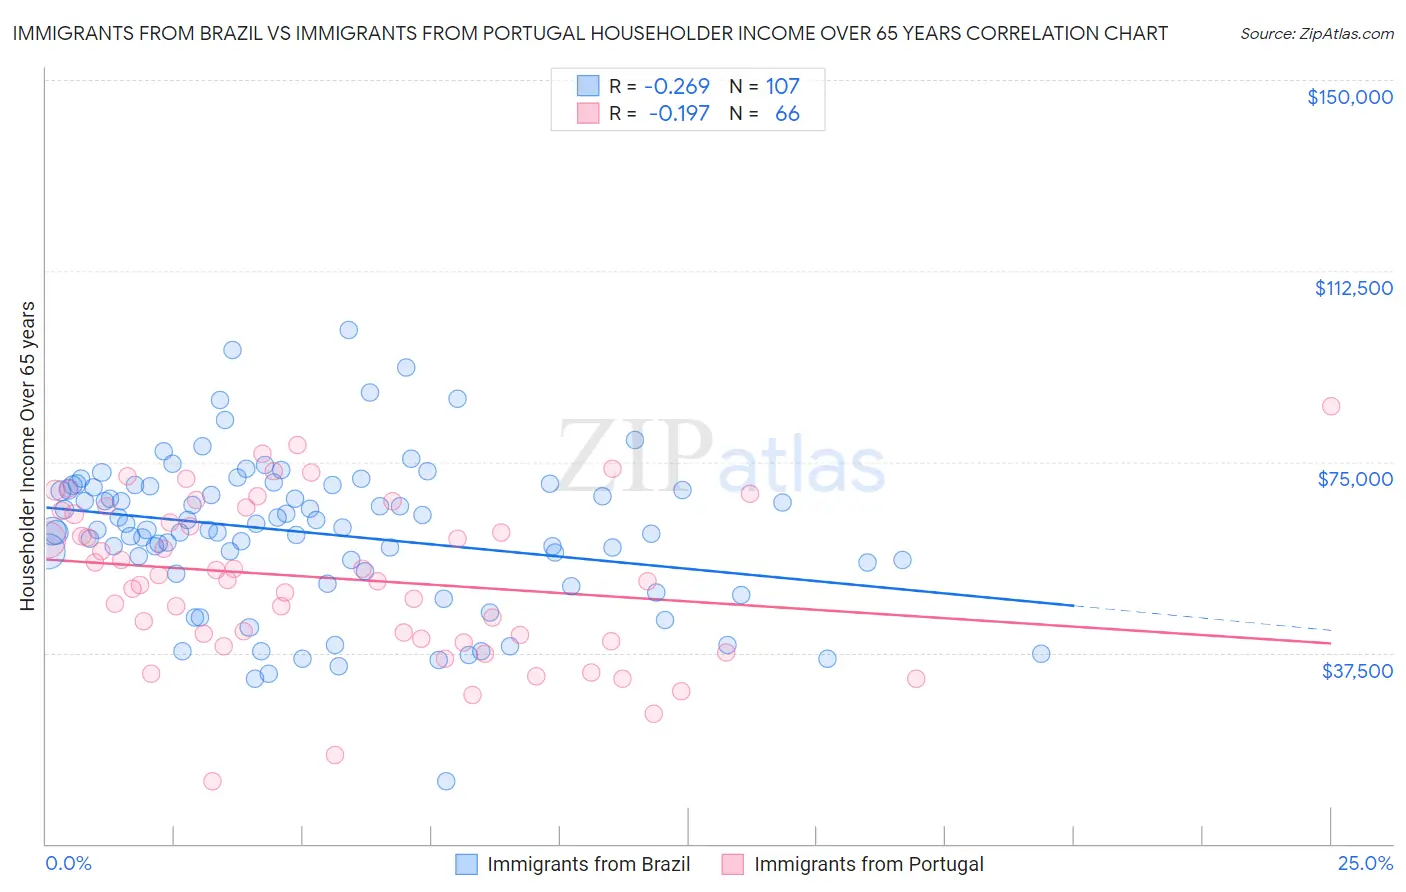 Immigrants from Brazil vs Immigrants from Portugal Householder Income Over 65 years